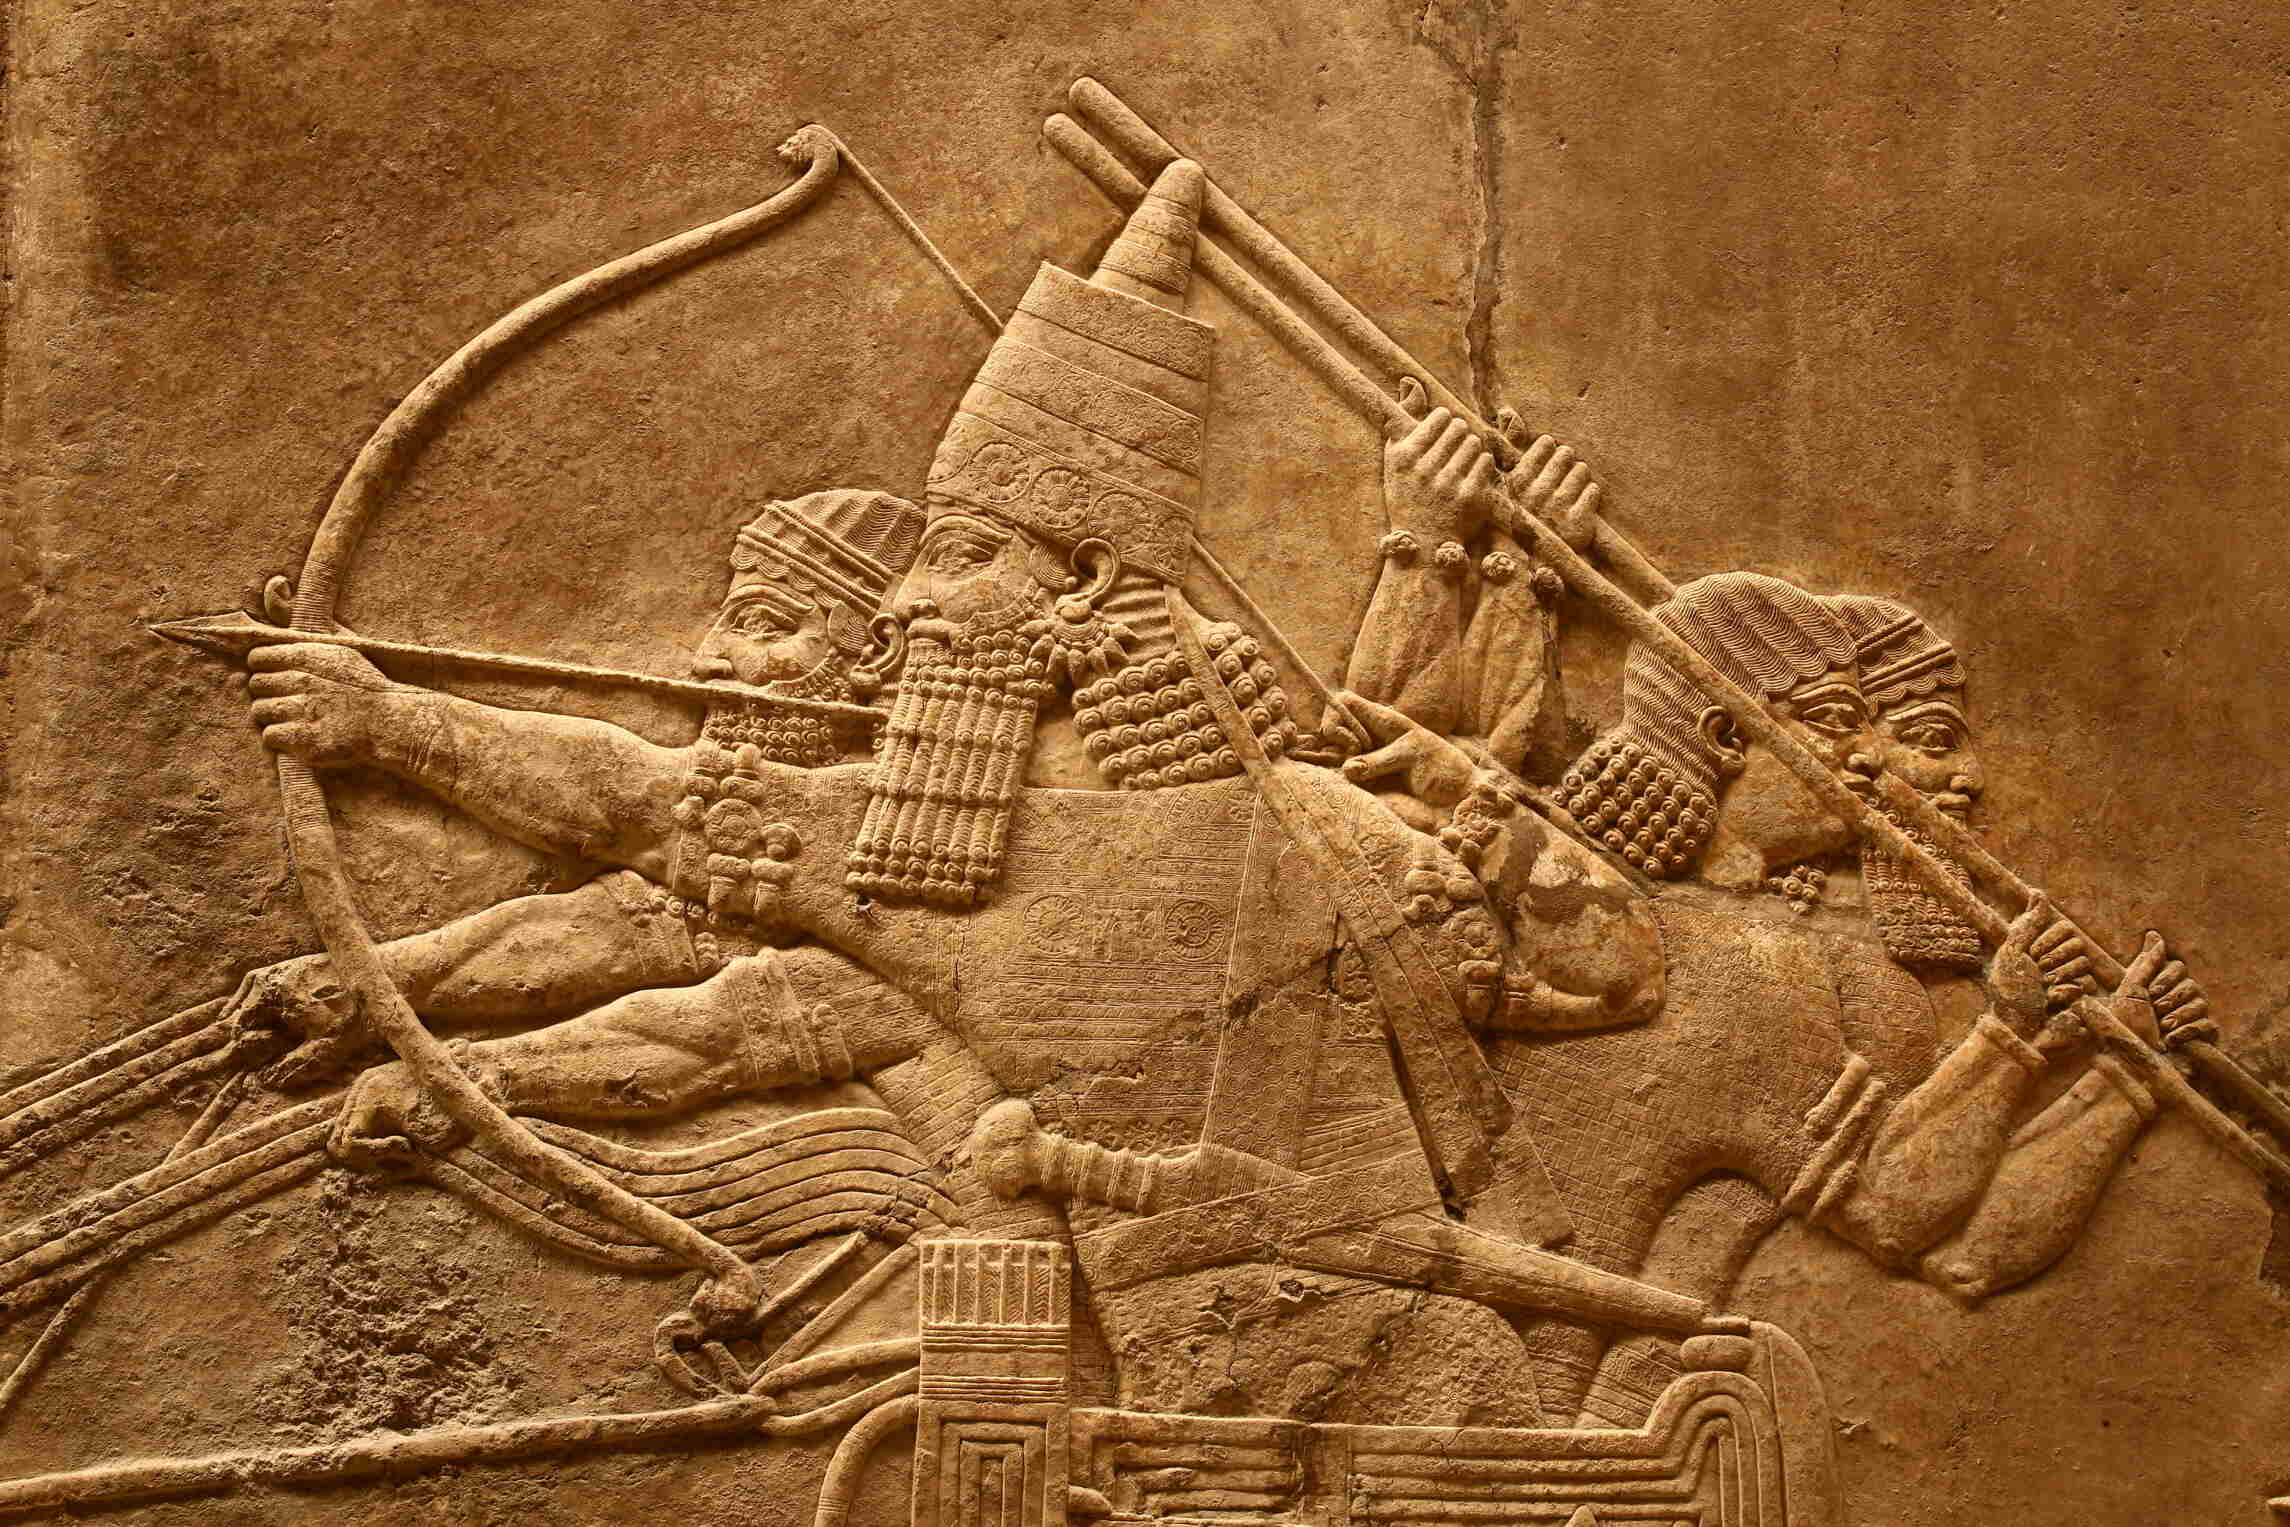 What Technology Did The Hittites And Assyrians Use In Battle?